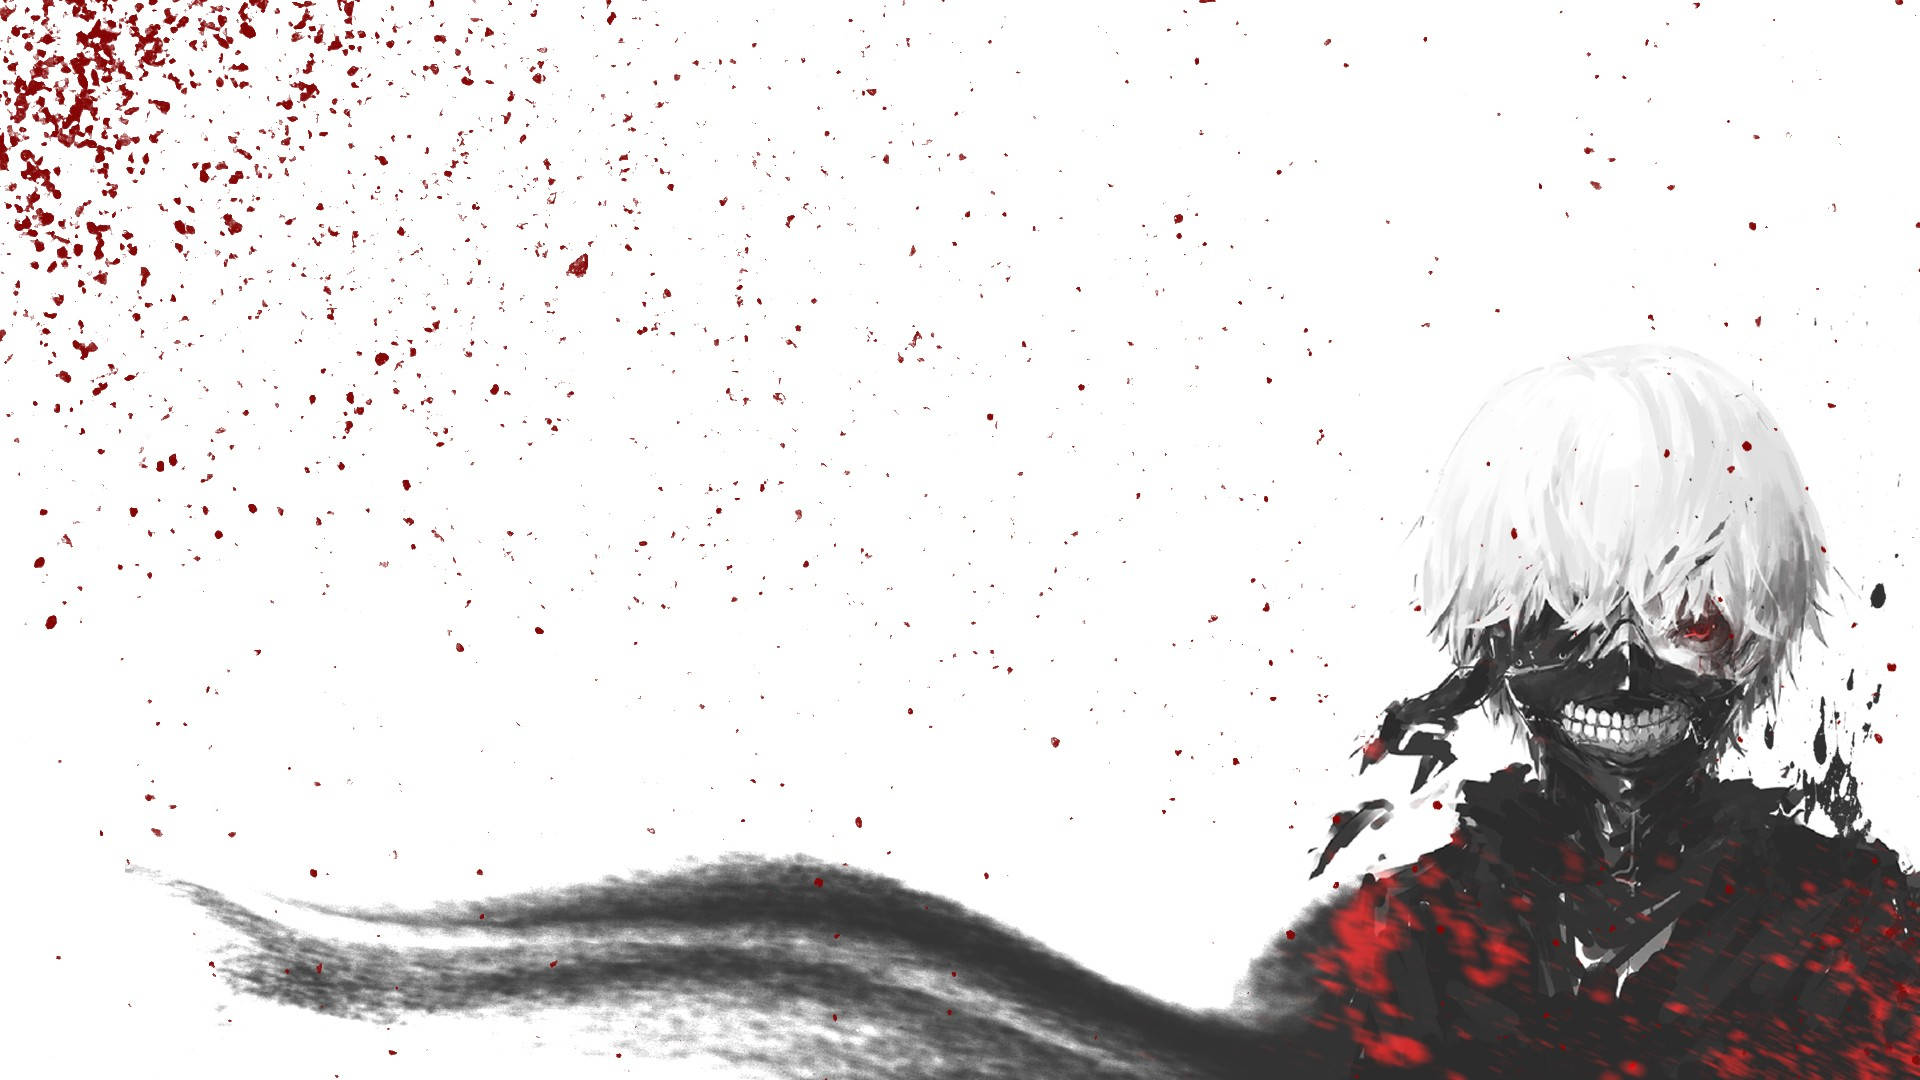 Tokyo Ghoul Aesthetic With Blood Splatter Wallpaper